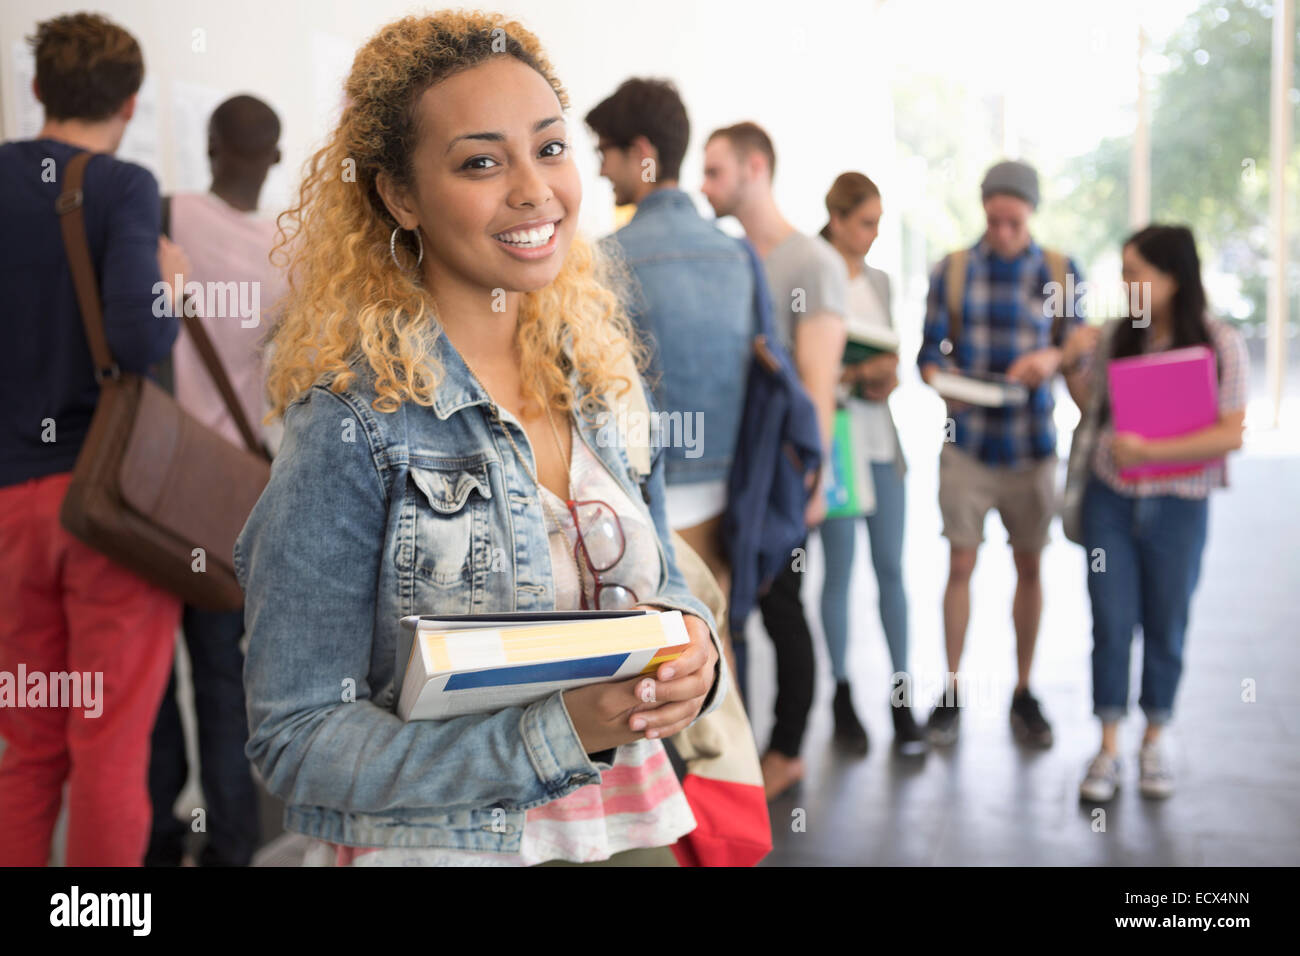 Smiling female student holding books and looking at camera Banque D'Images